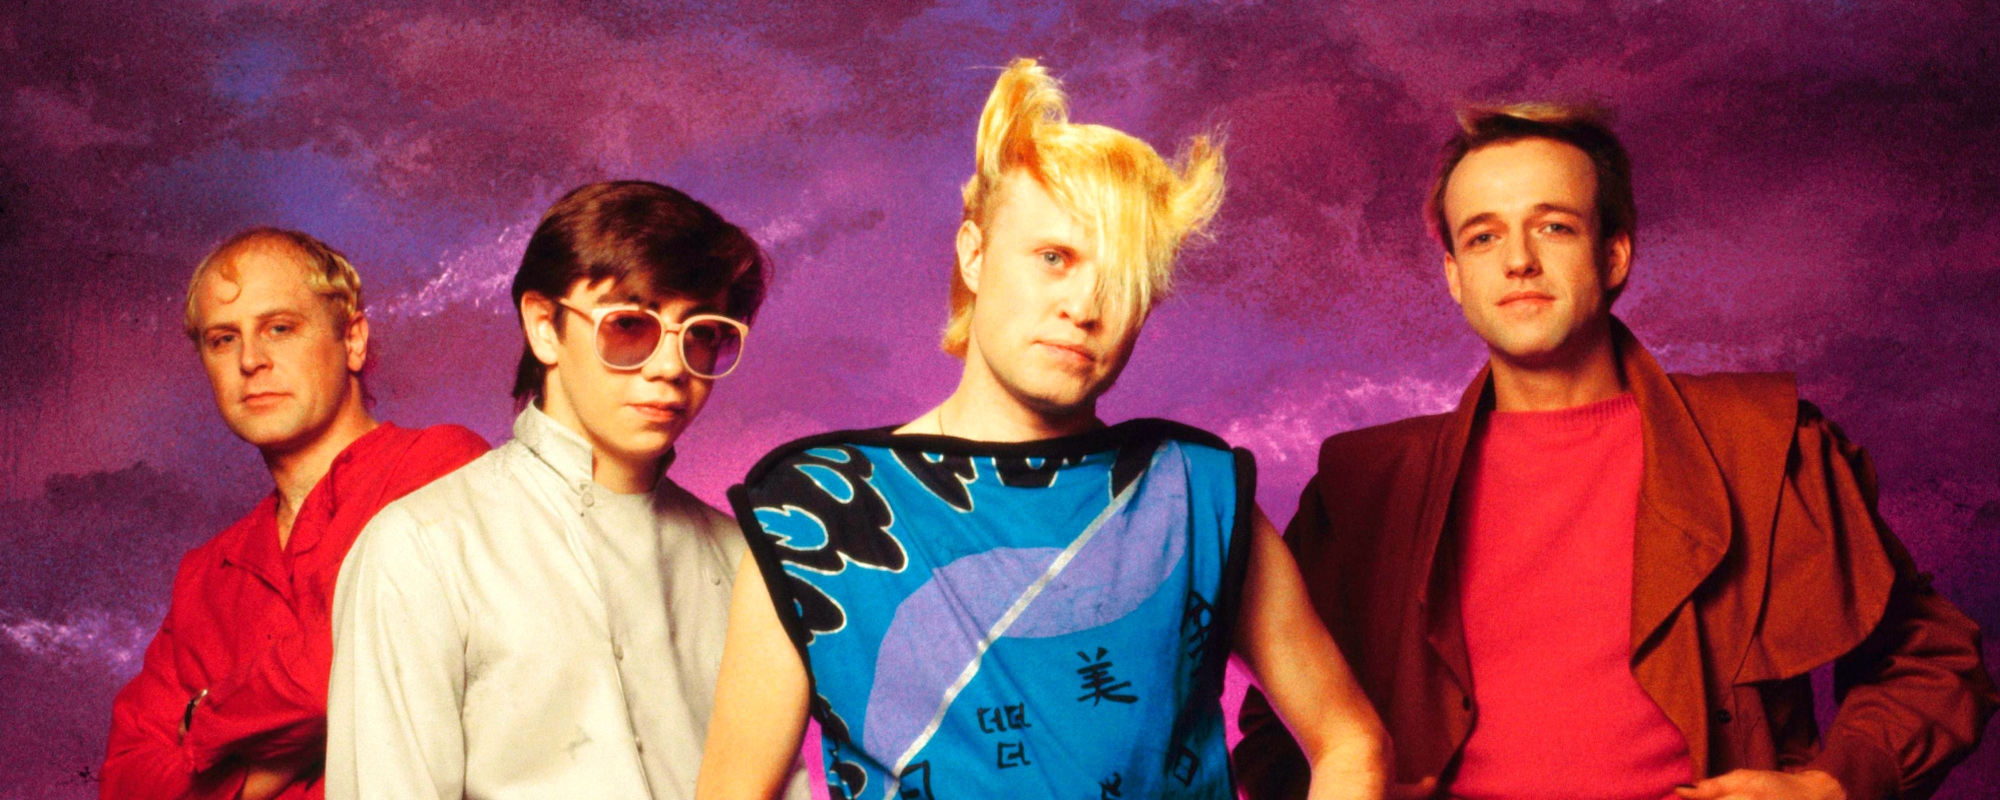 Where Are They Now?: A Flock of Seagulls